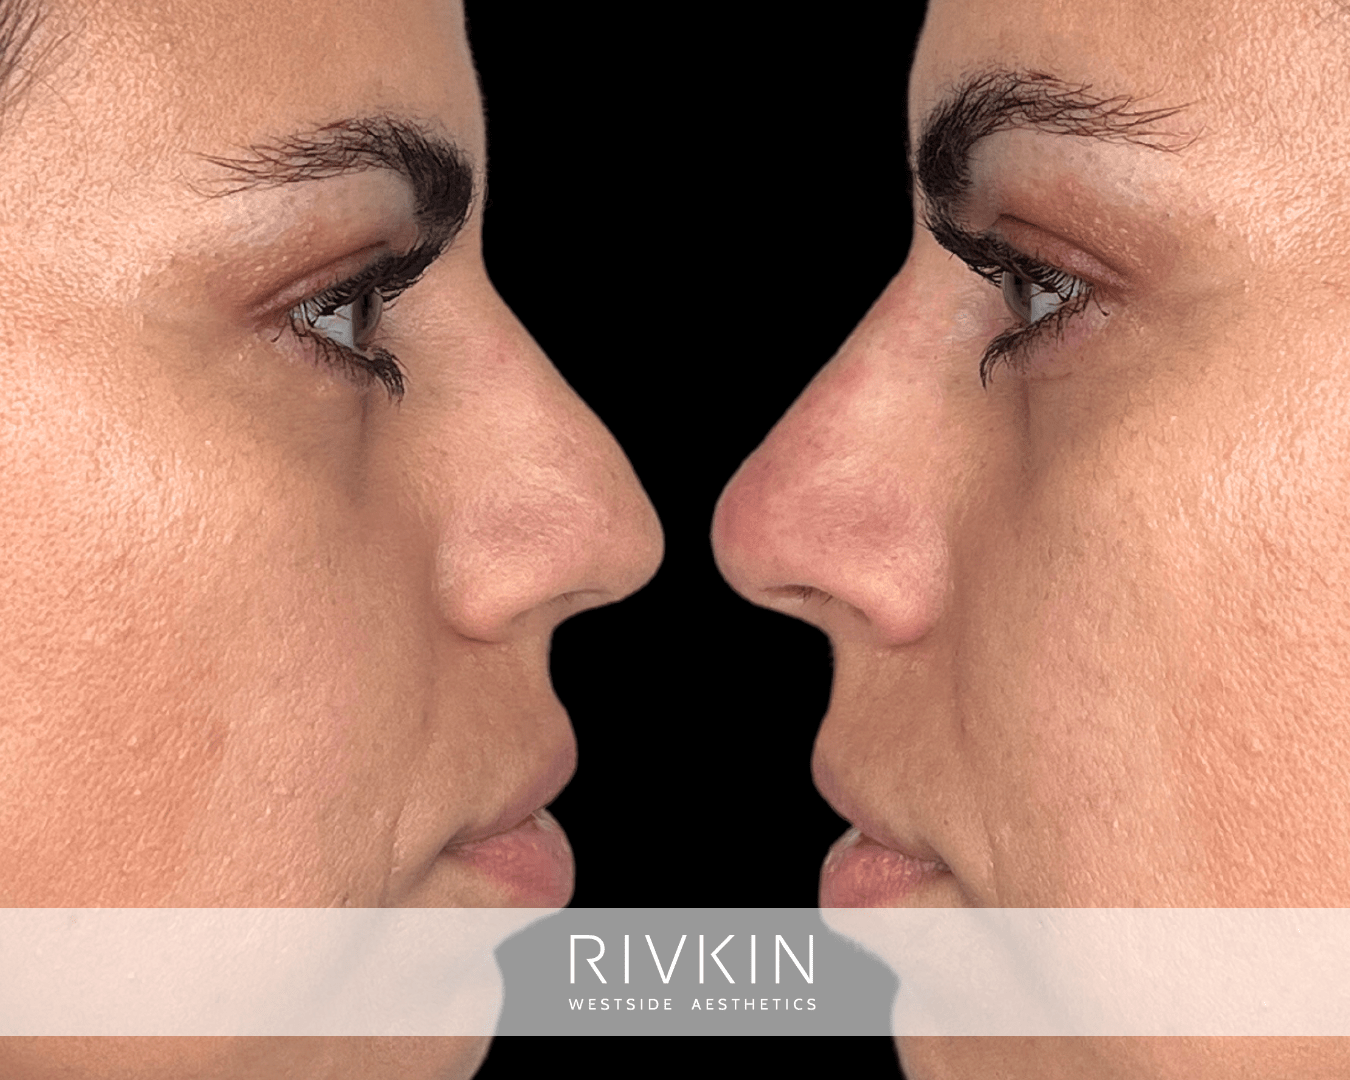 This patient's face looks very different after nurse practitioner Presile performed a liquid rhinoplasty to correct the droopiness of her nose and smooth the contours.